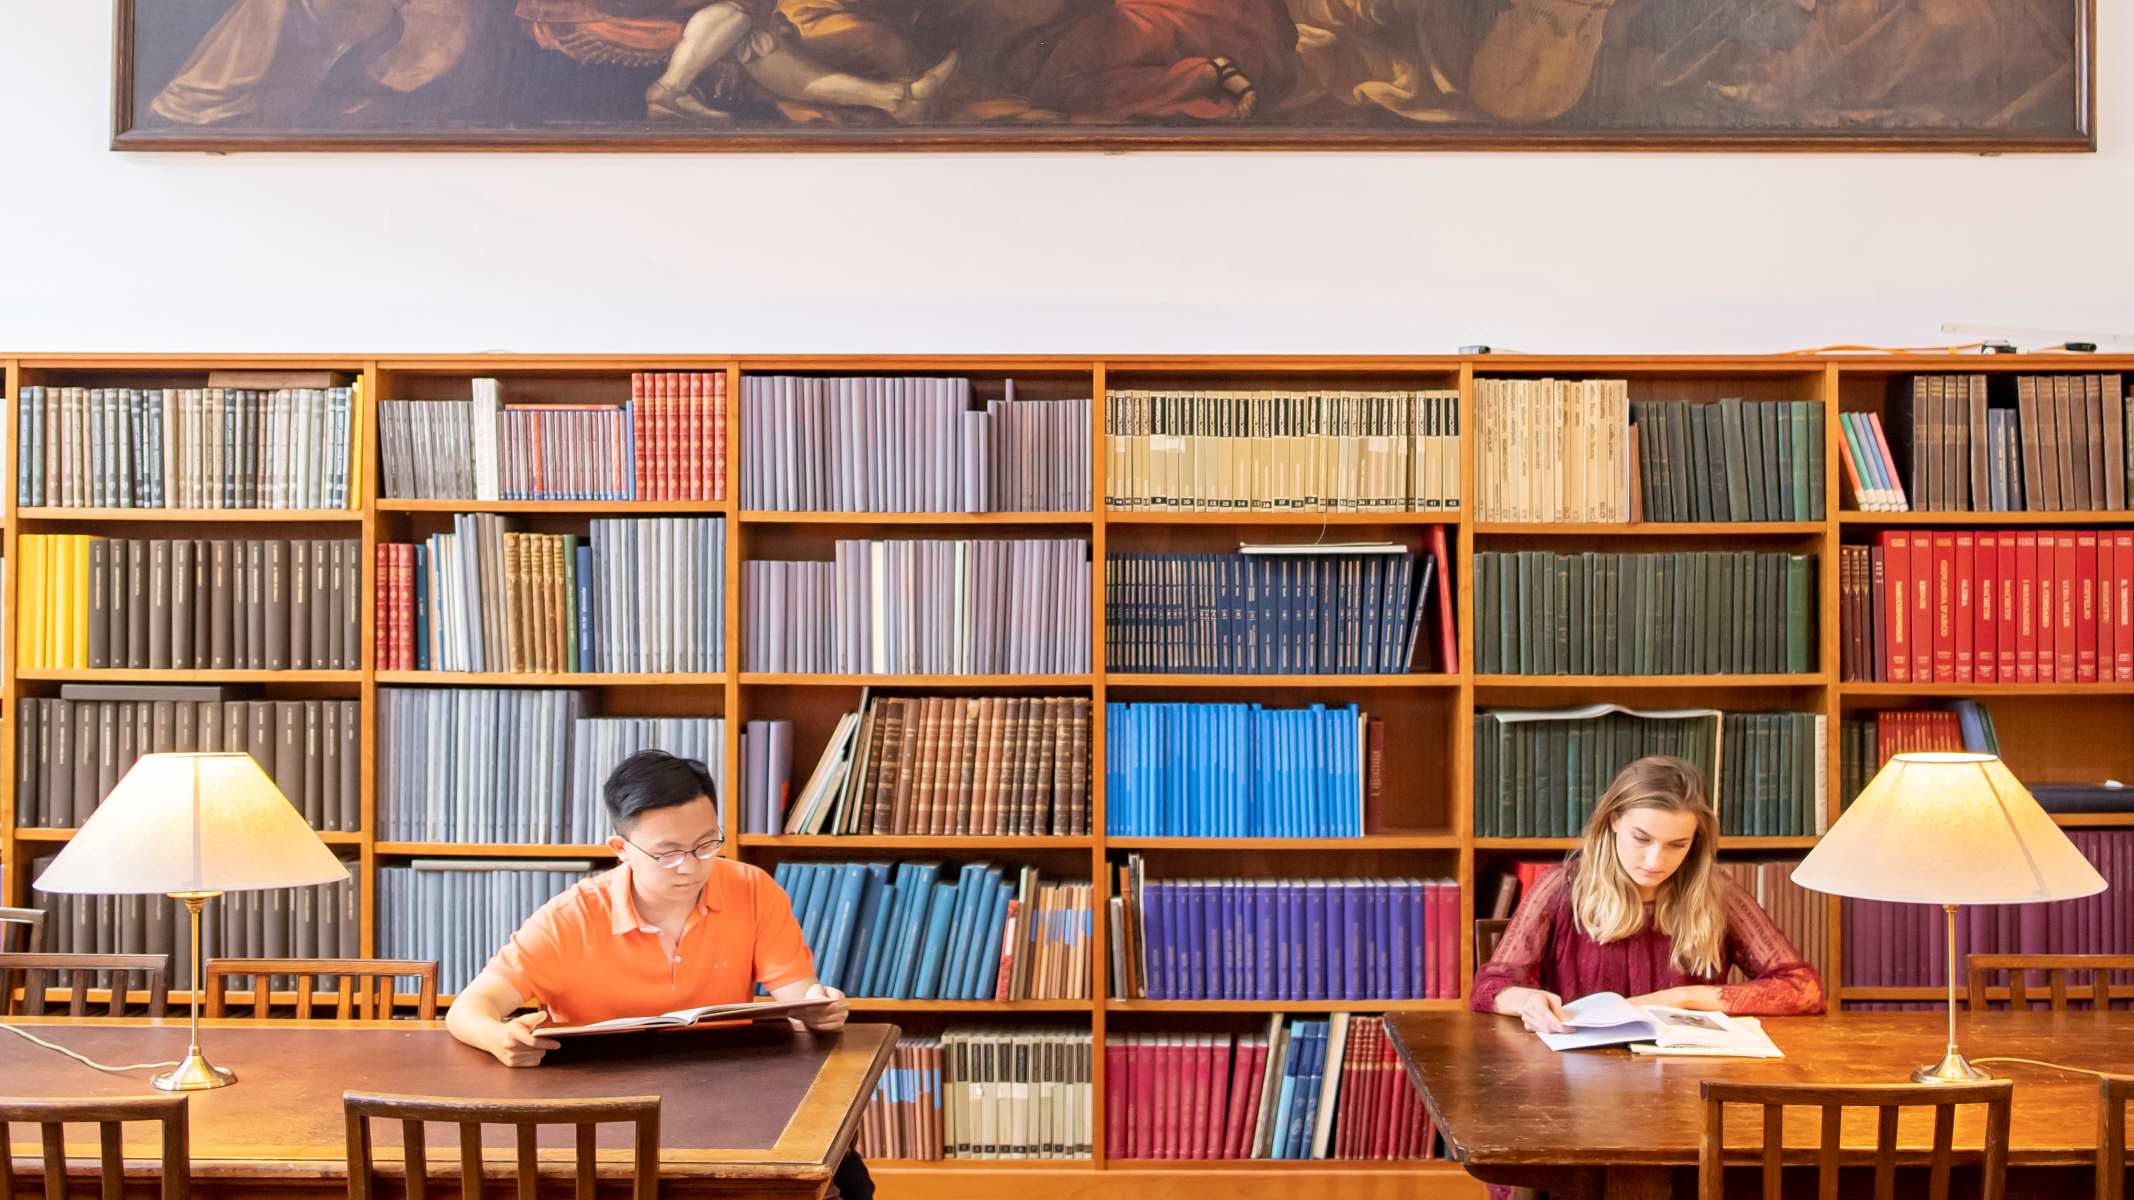 12-captivating-facts-about-royal-college-of-music-library